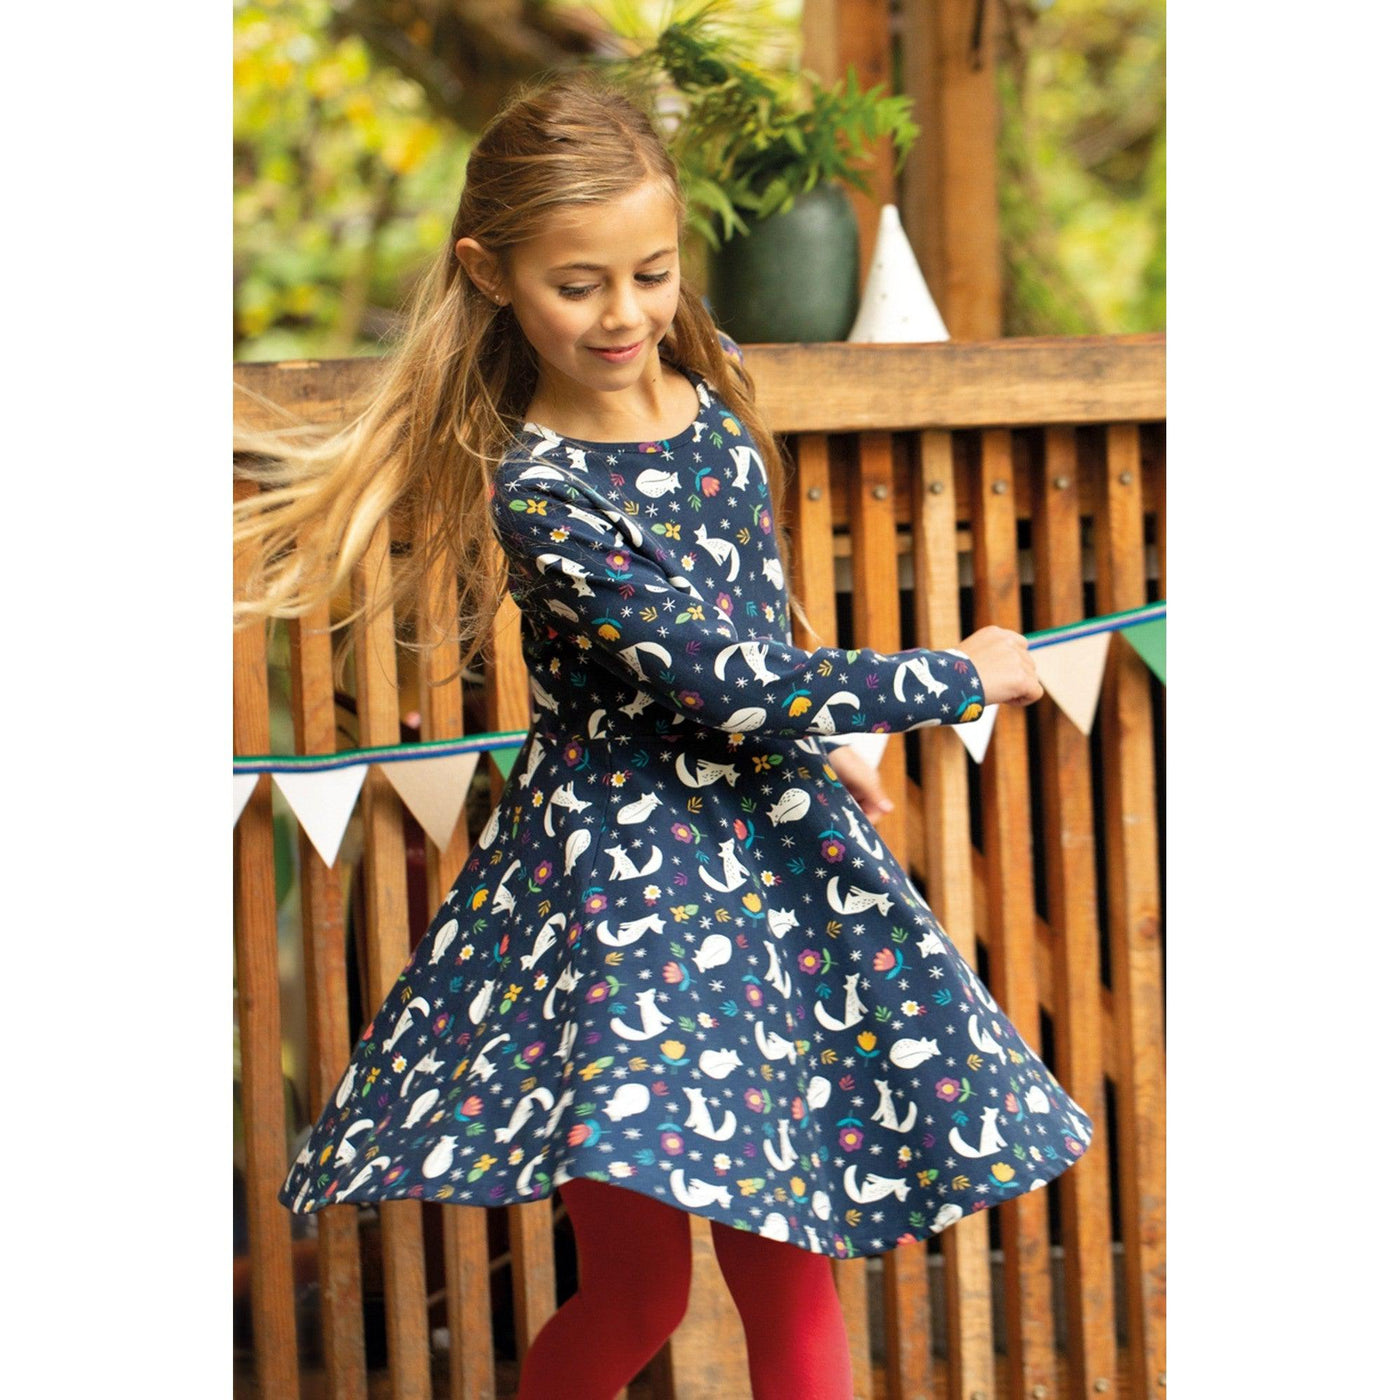 Sofia Skater Dress - Meadow Snoozing by Frugi *INDIE EXCLUSIVE*